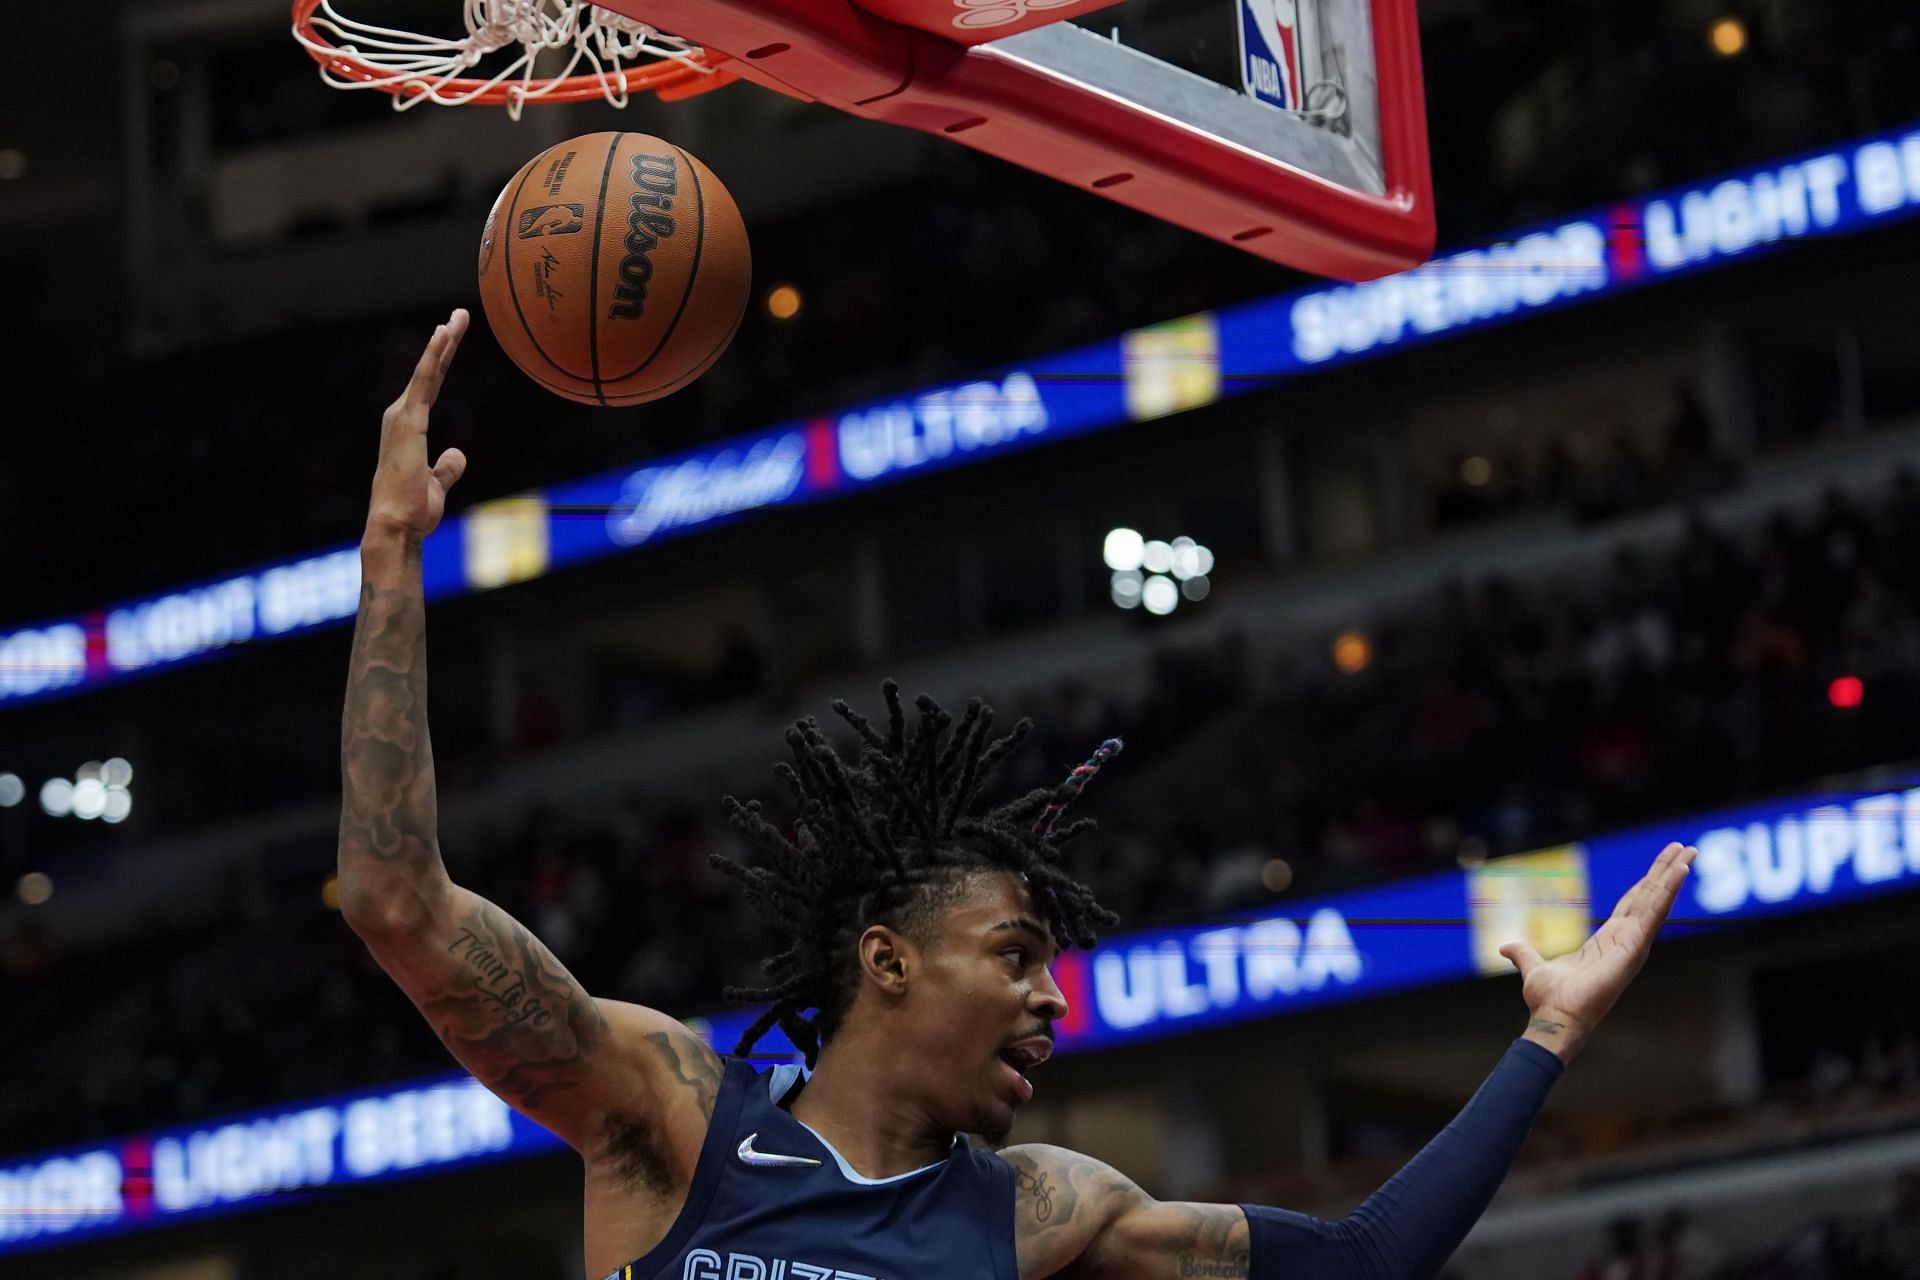 Ja Morant #12 of the Memphis Grizzlies reacts after making a basket against the Chicago Bulls in the second half during a preseason game at United Center on October 15, 2021 in Chicago, Illinois.